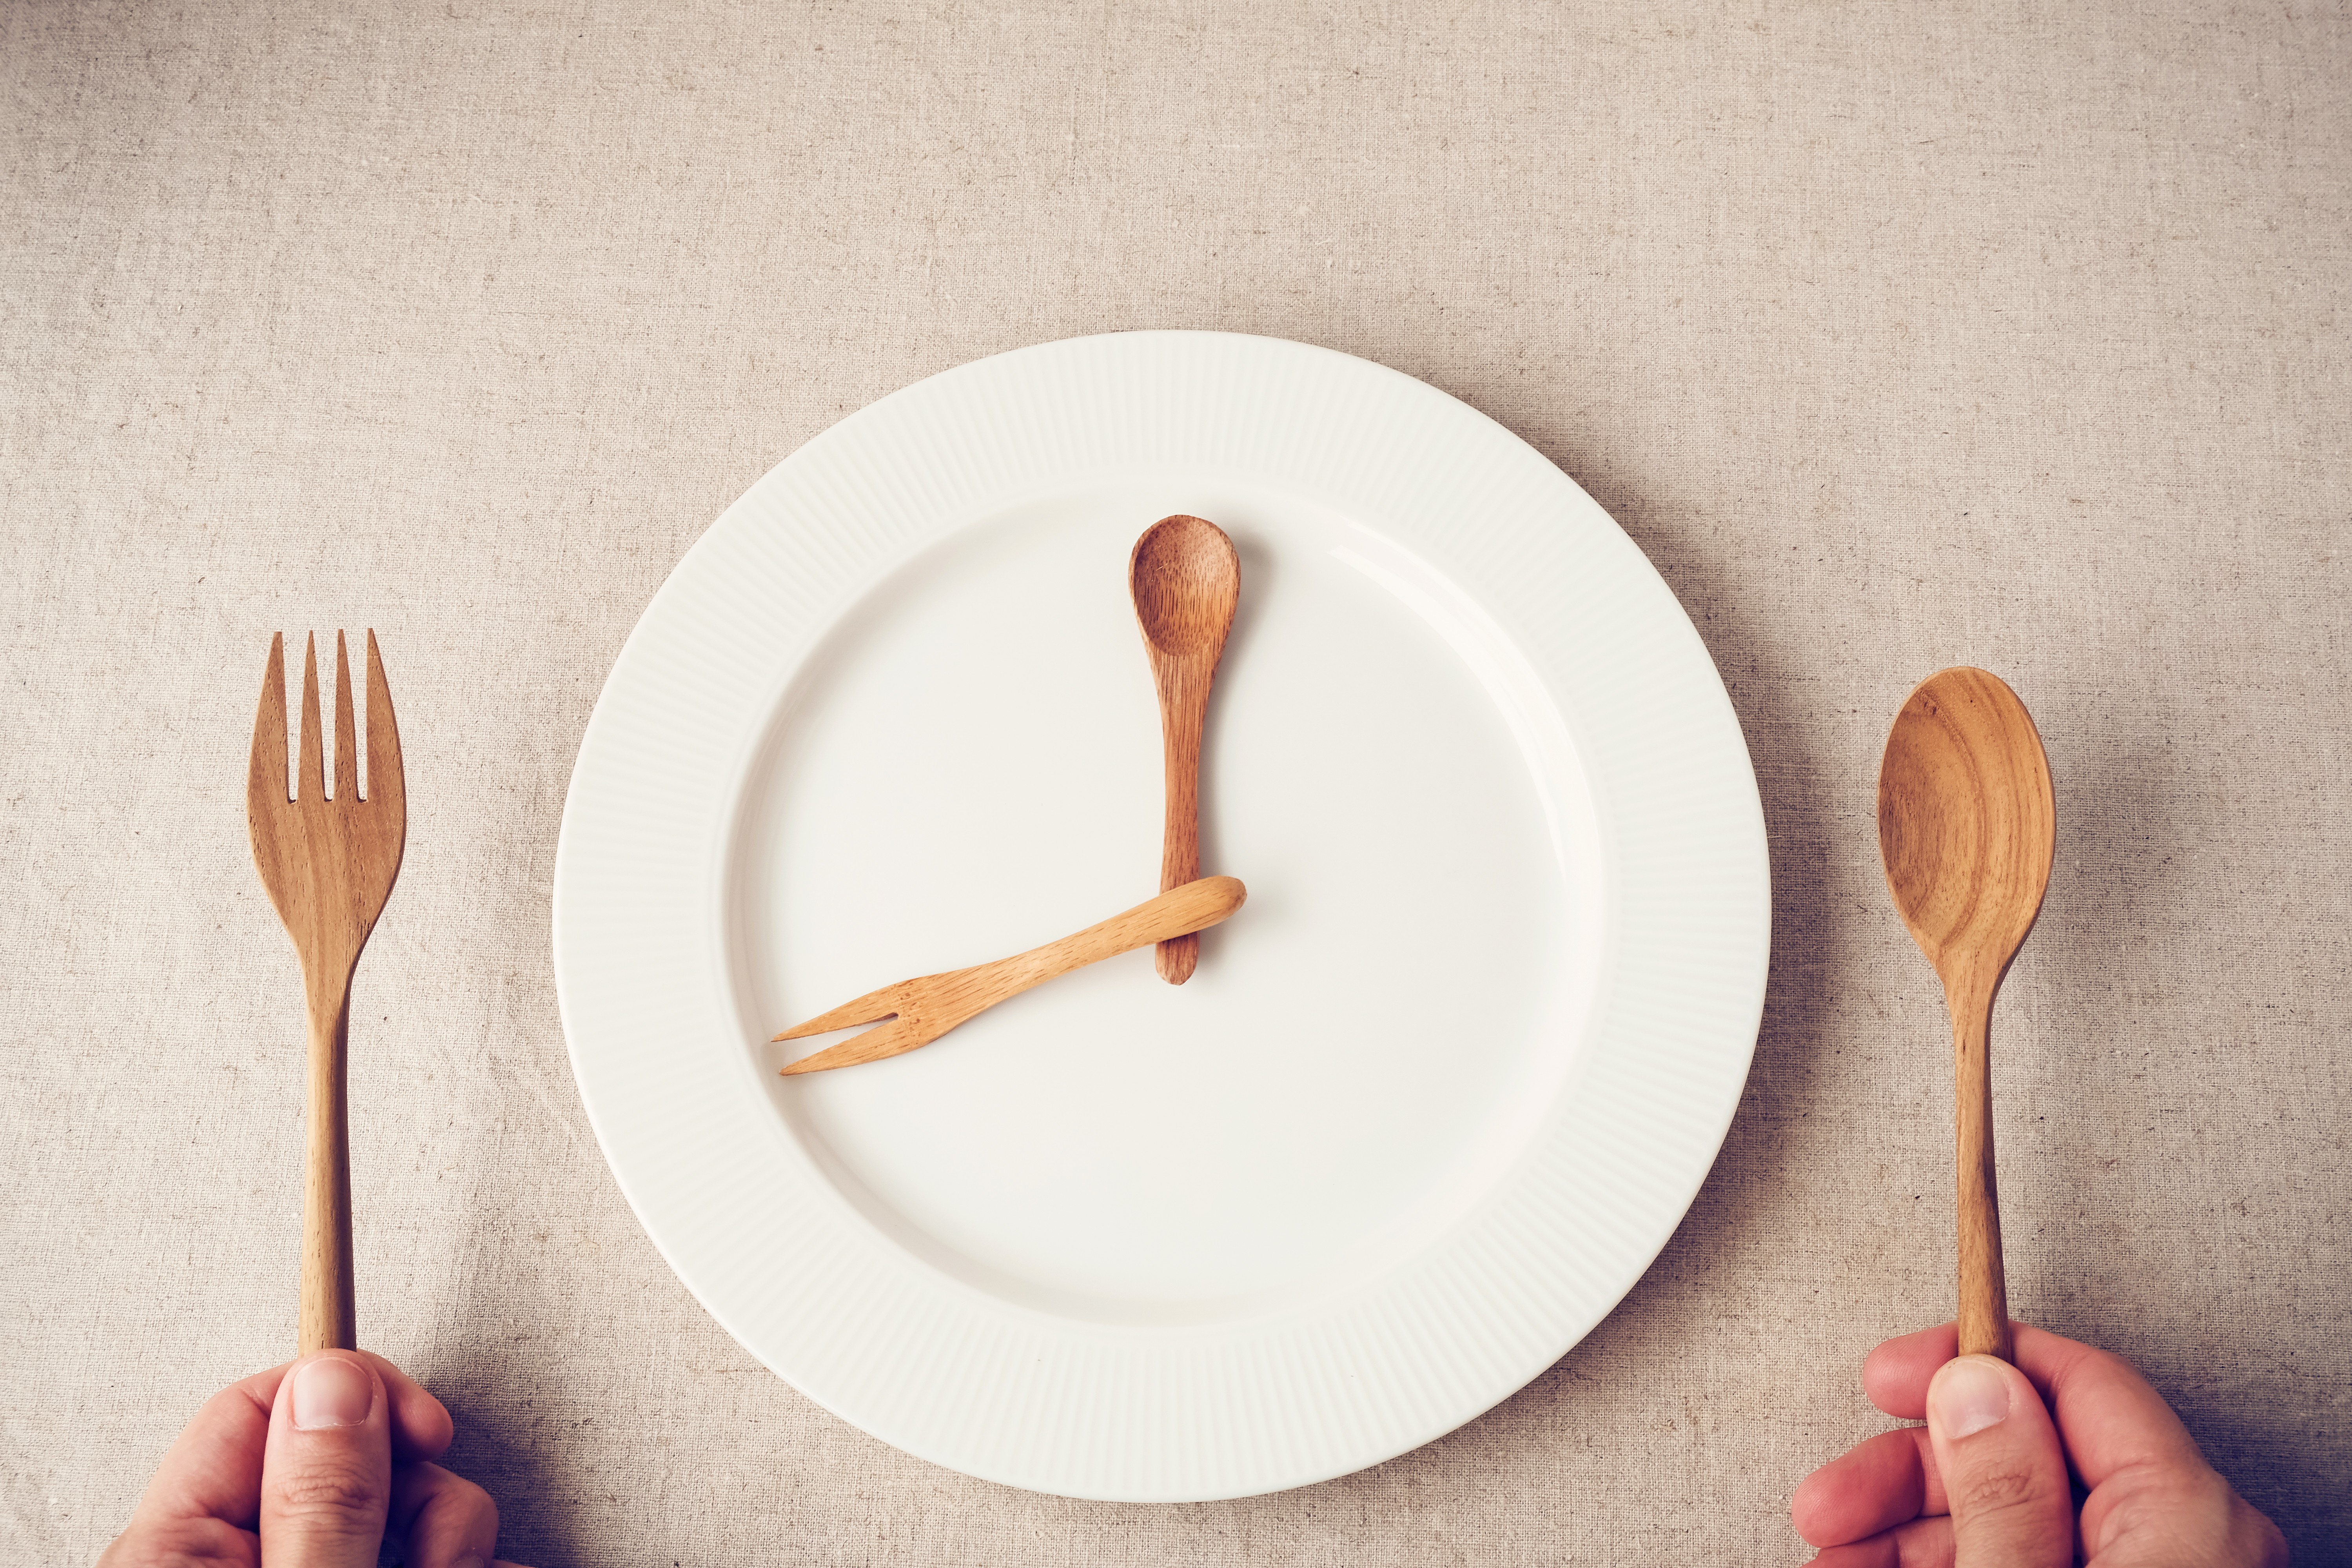 Intermittent fasting might be better than regular dieting. Photo: Shutterstock